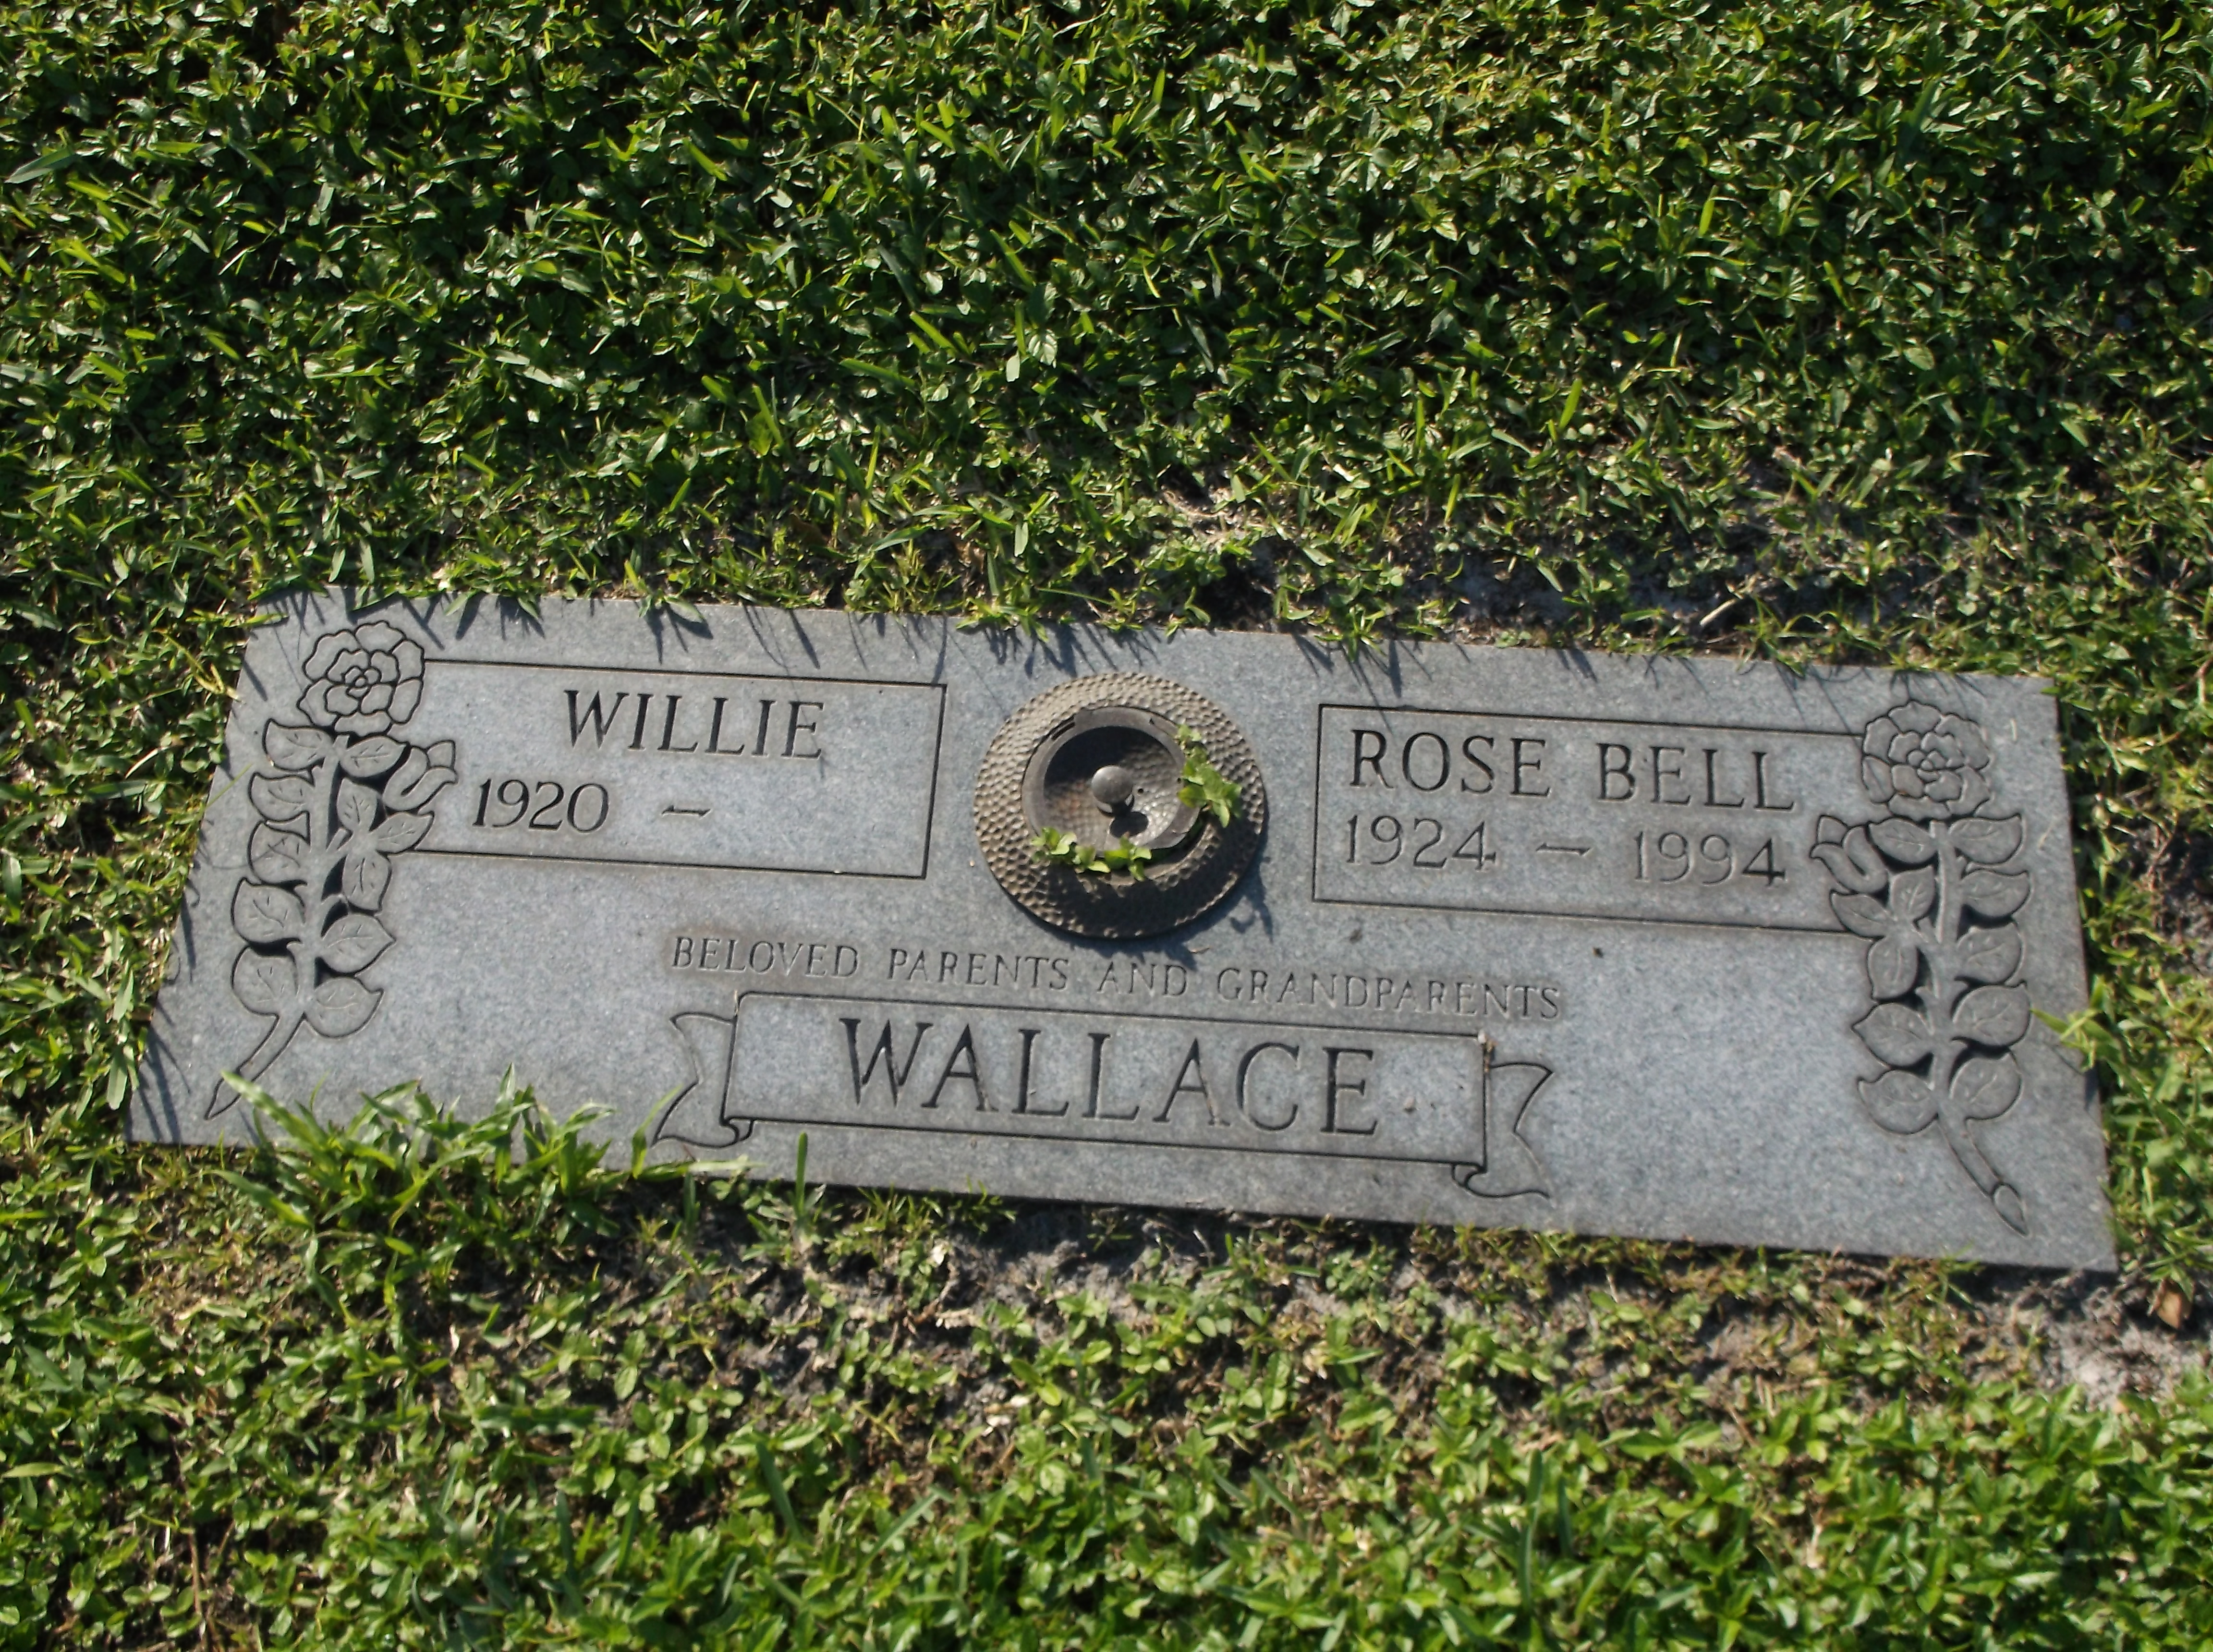 Willie Wallace